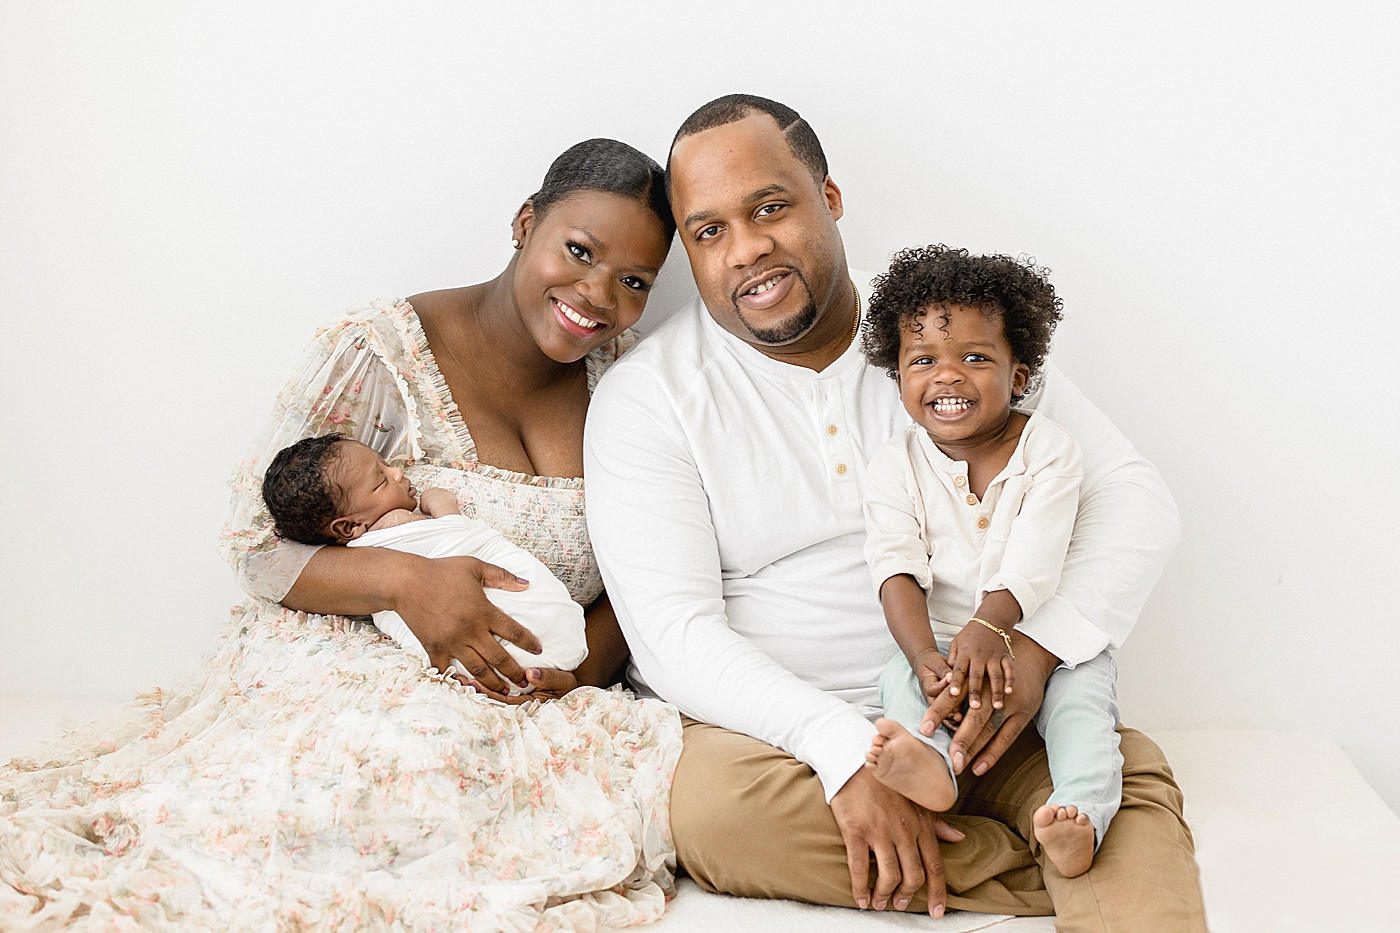 Family portrait of parents with two boys. Photo by Brittany Elise Photography.